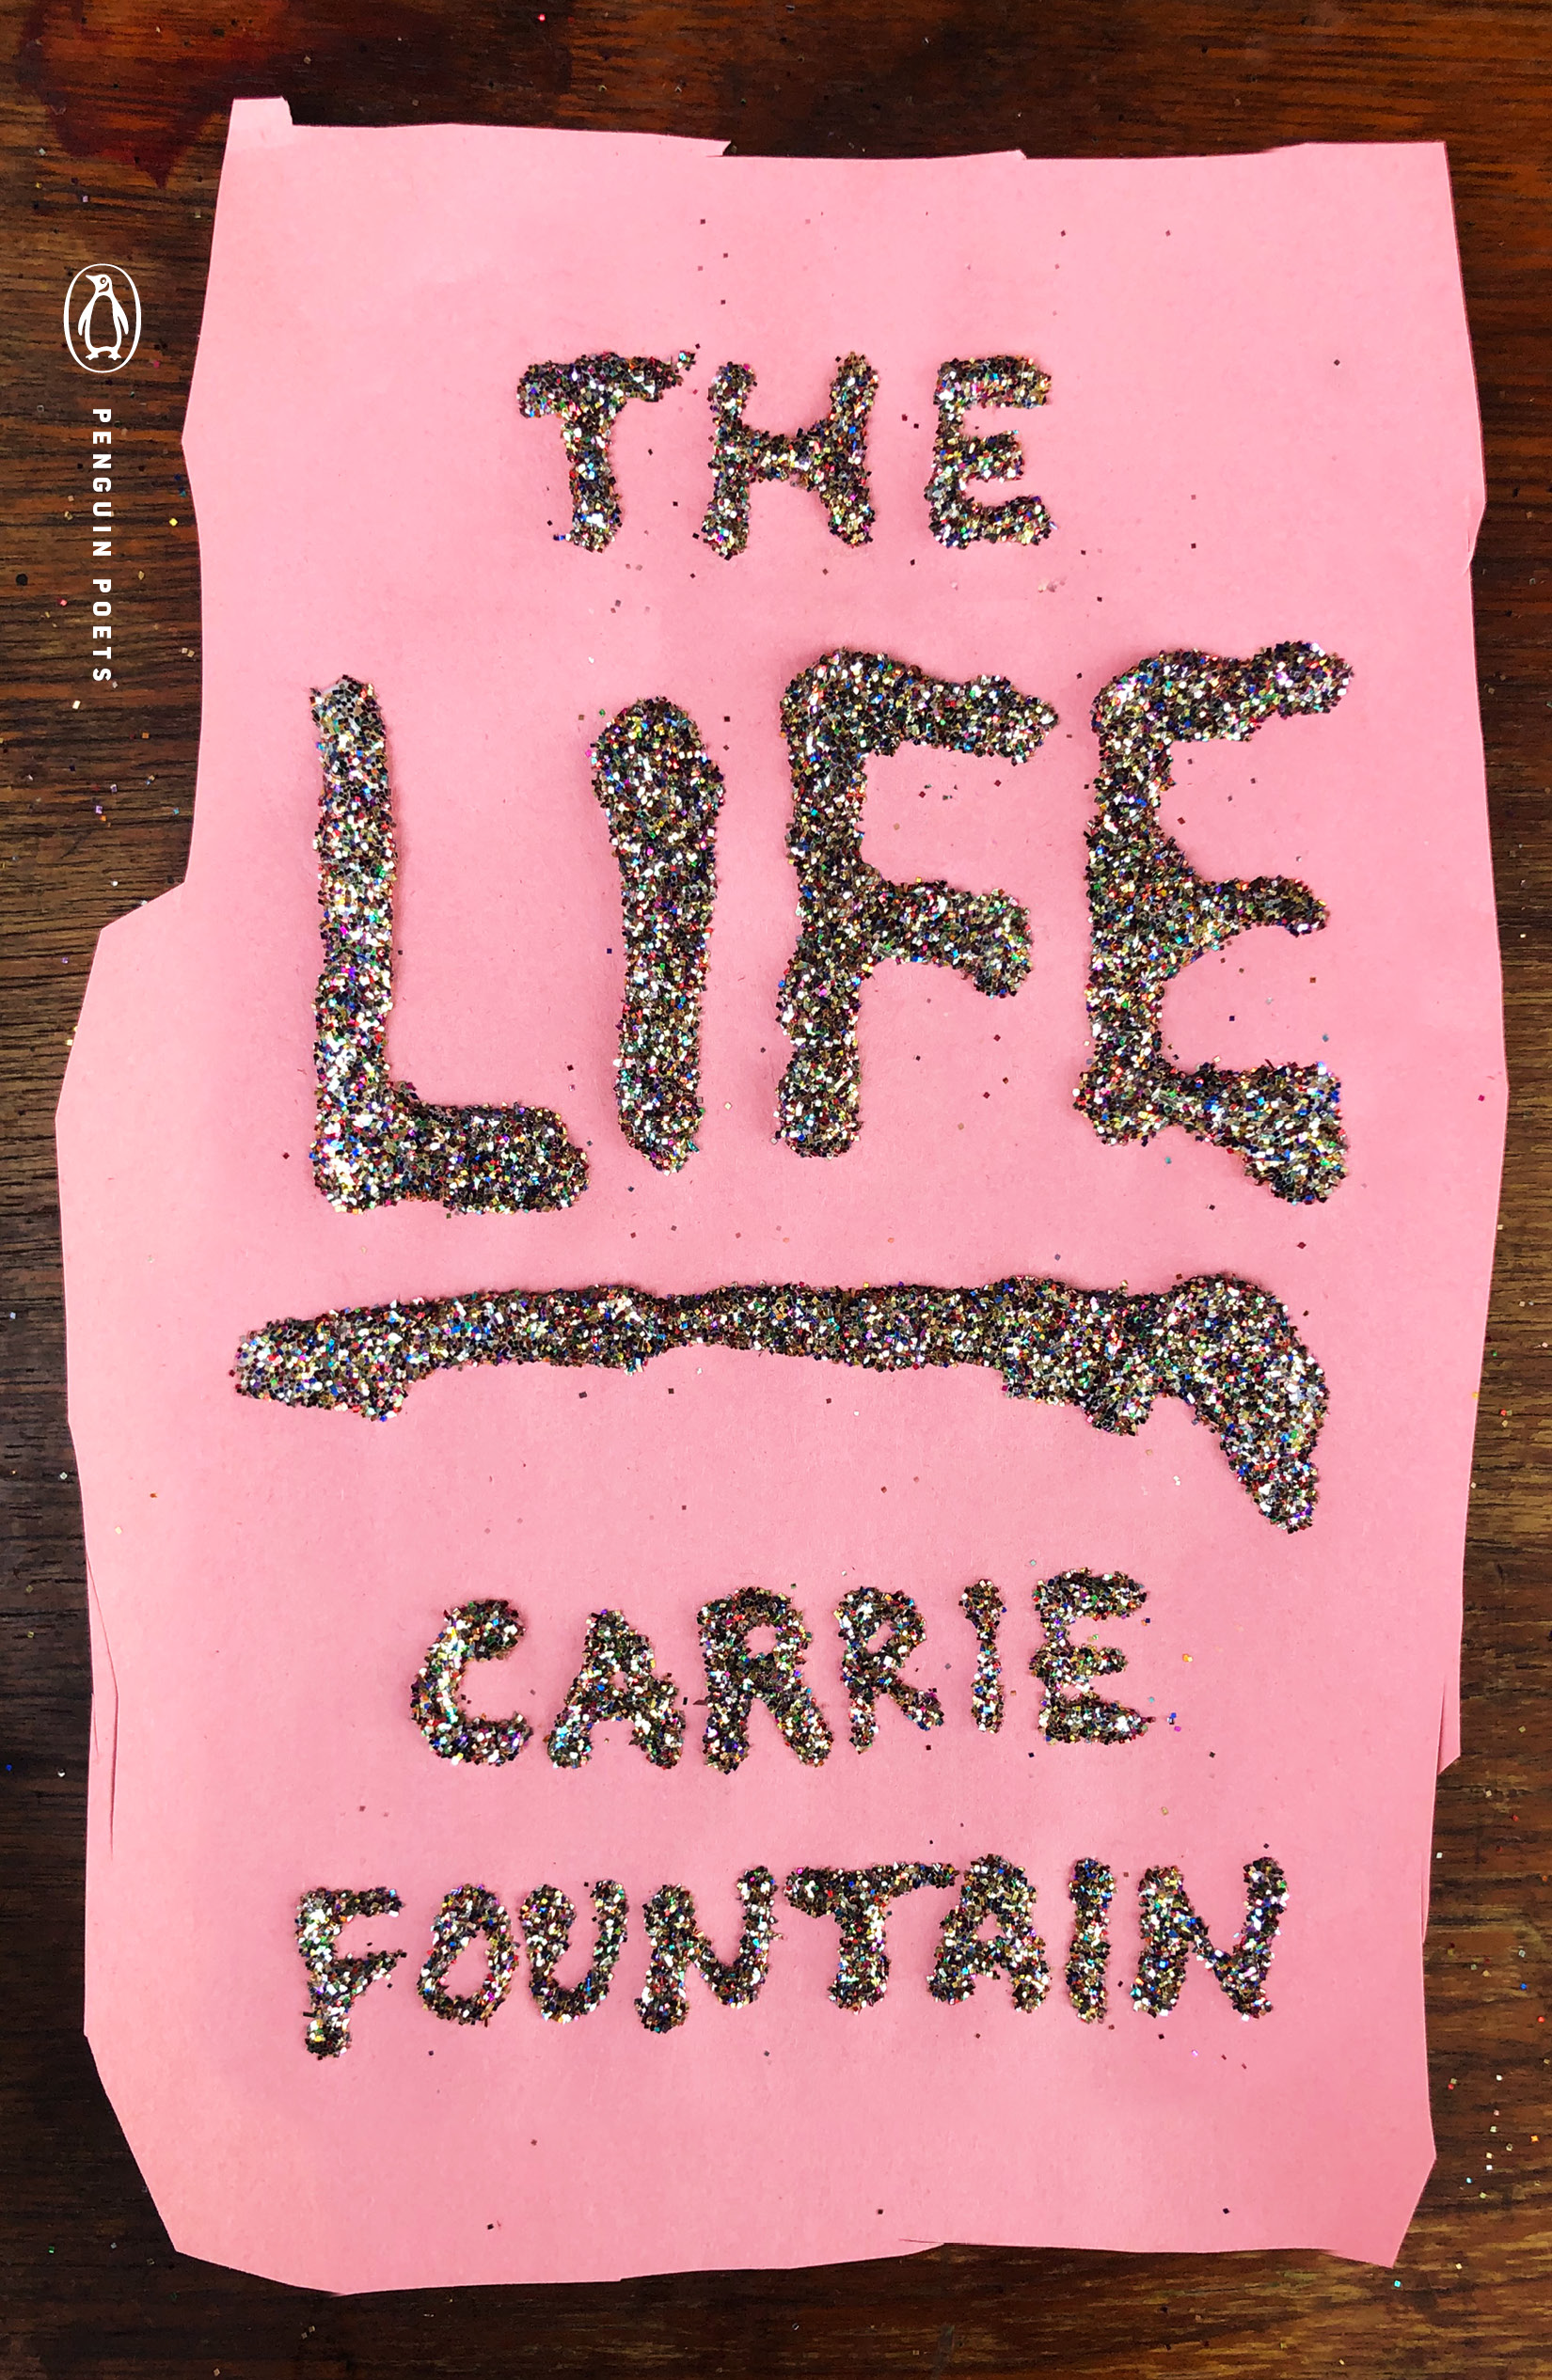 Book Cover Image of “The Life”